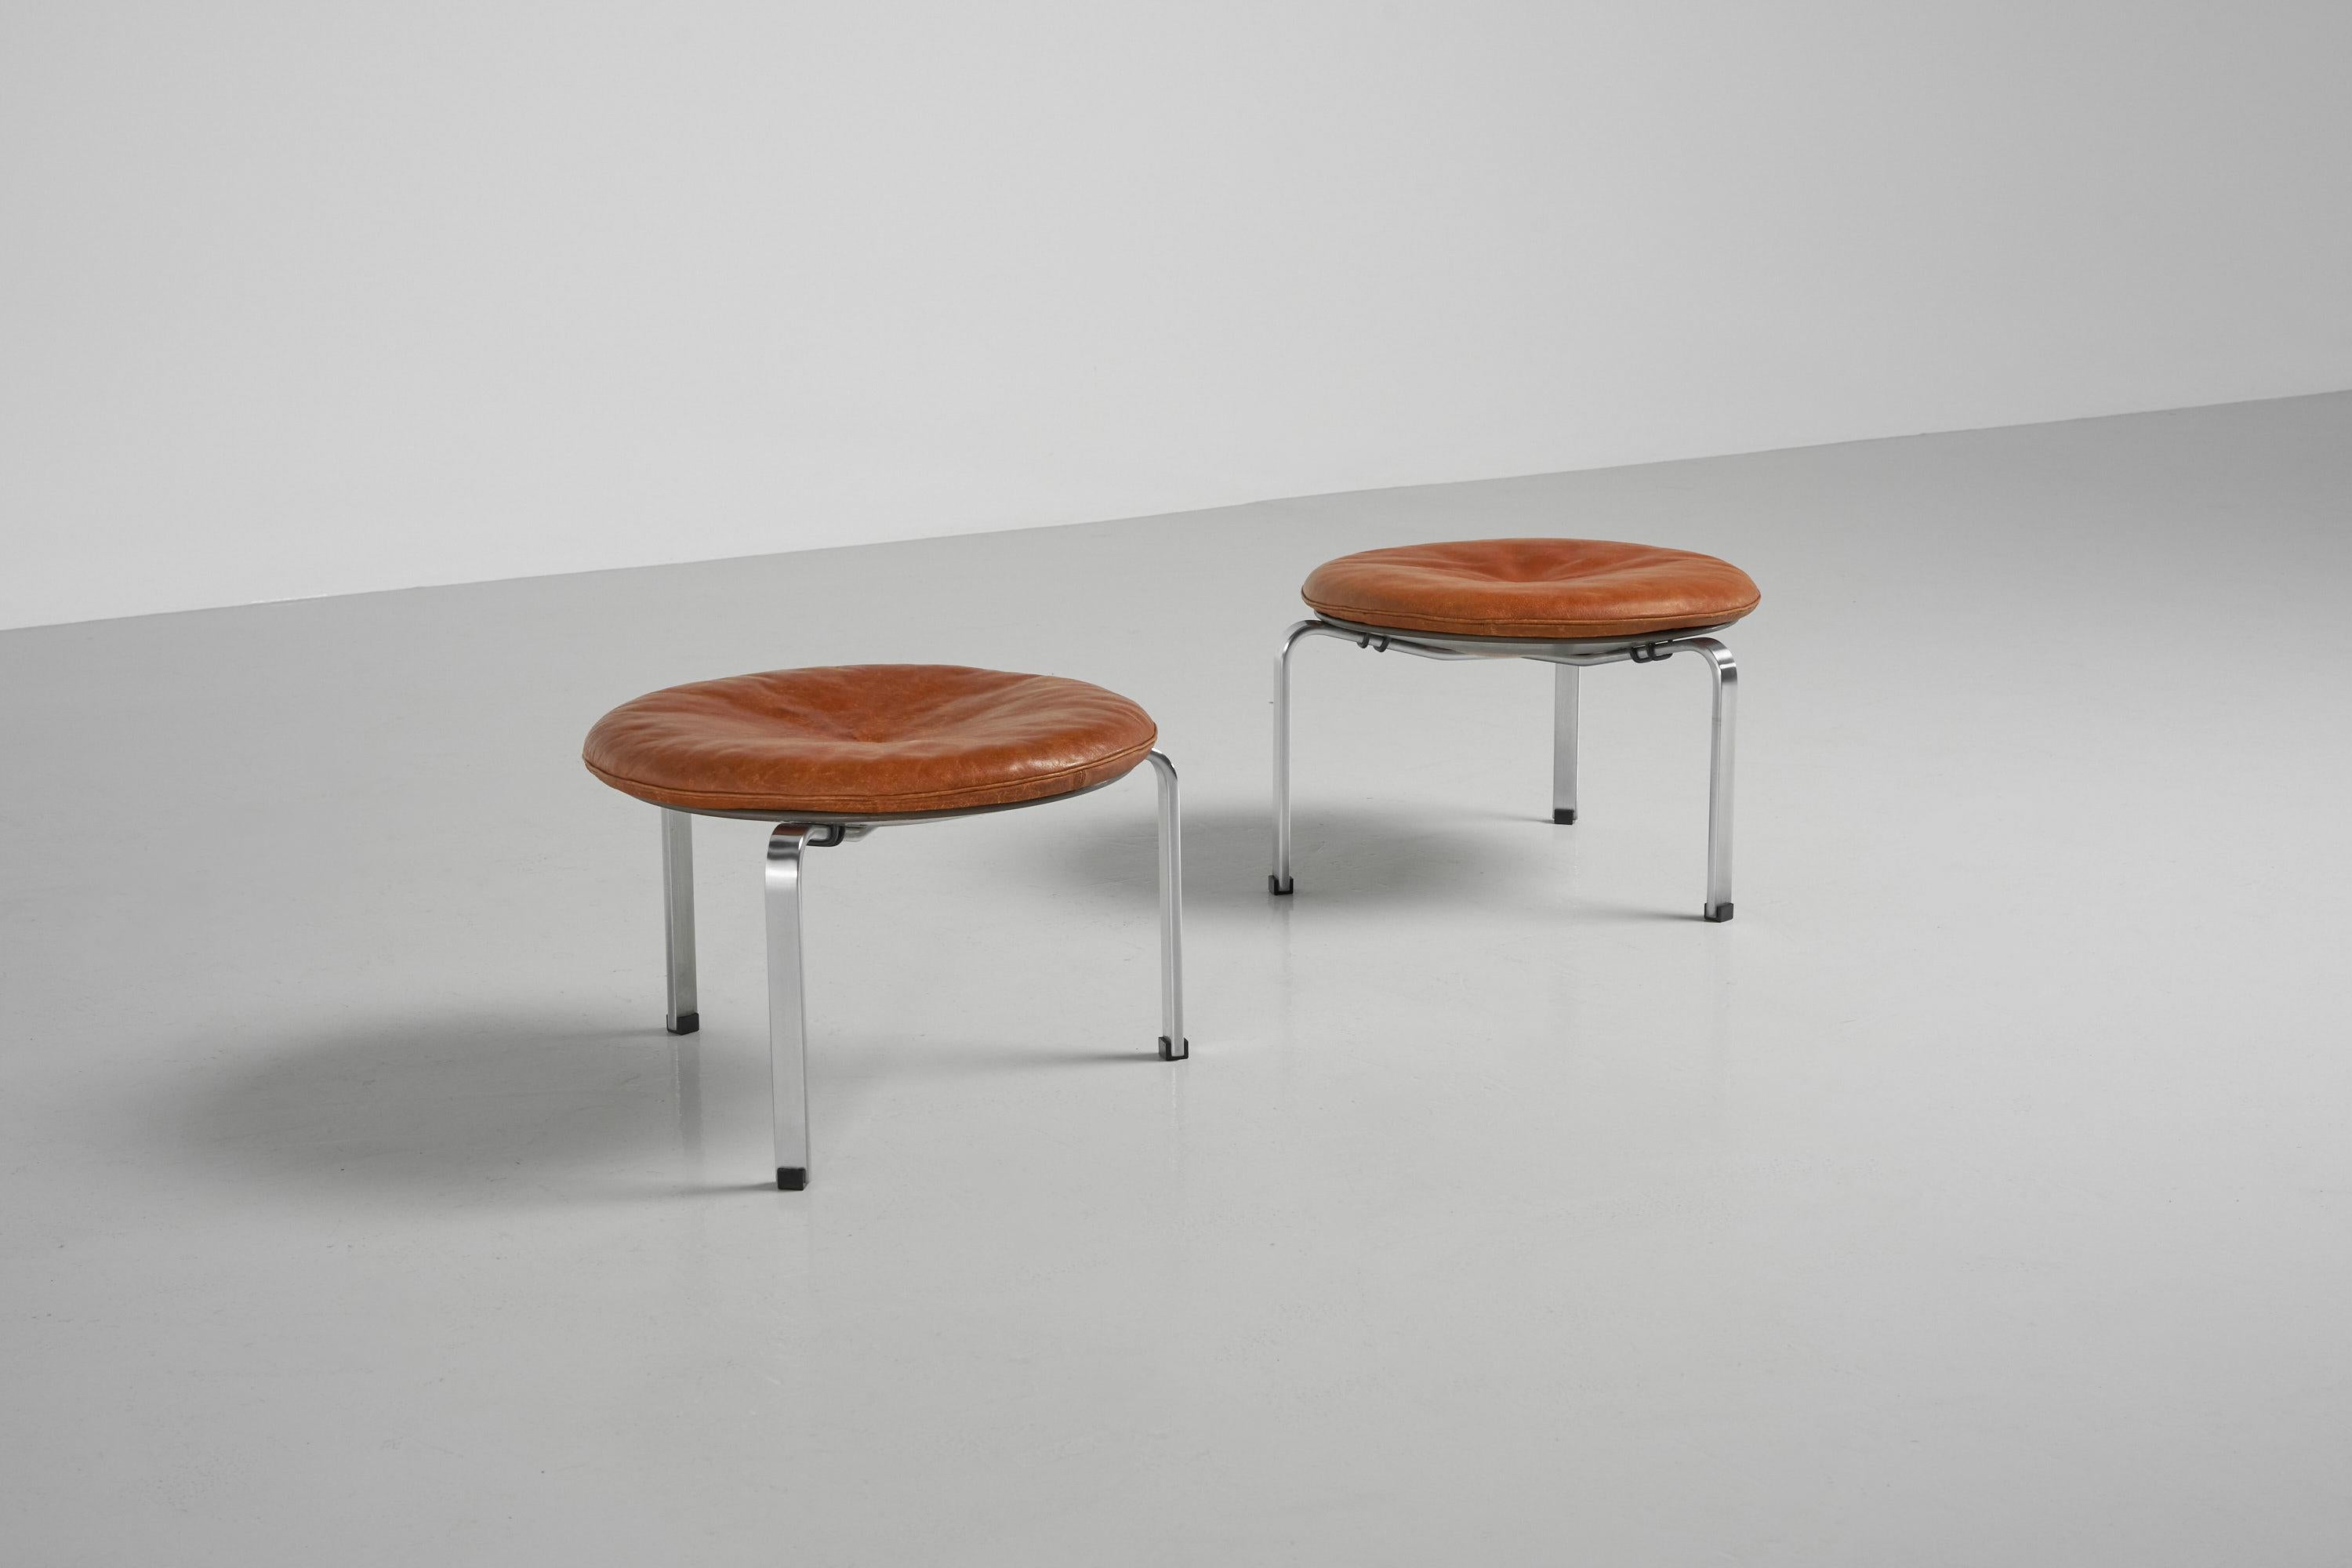 Amazing set of 2 model PK33 stools designed by Poul Kjaerholm and a first production manufactured by Ejvind Kold Christensen, Denmark 1959. This pair of stools has a matt chrome plated spring steel frame with black plastic floor protection feet. The